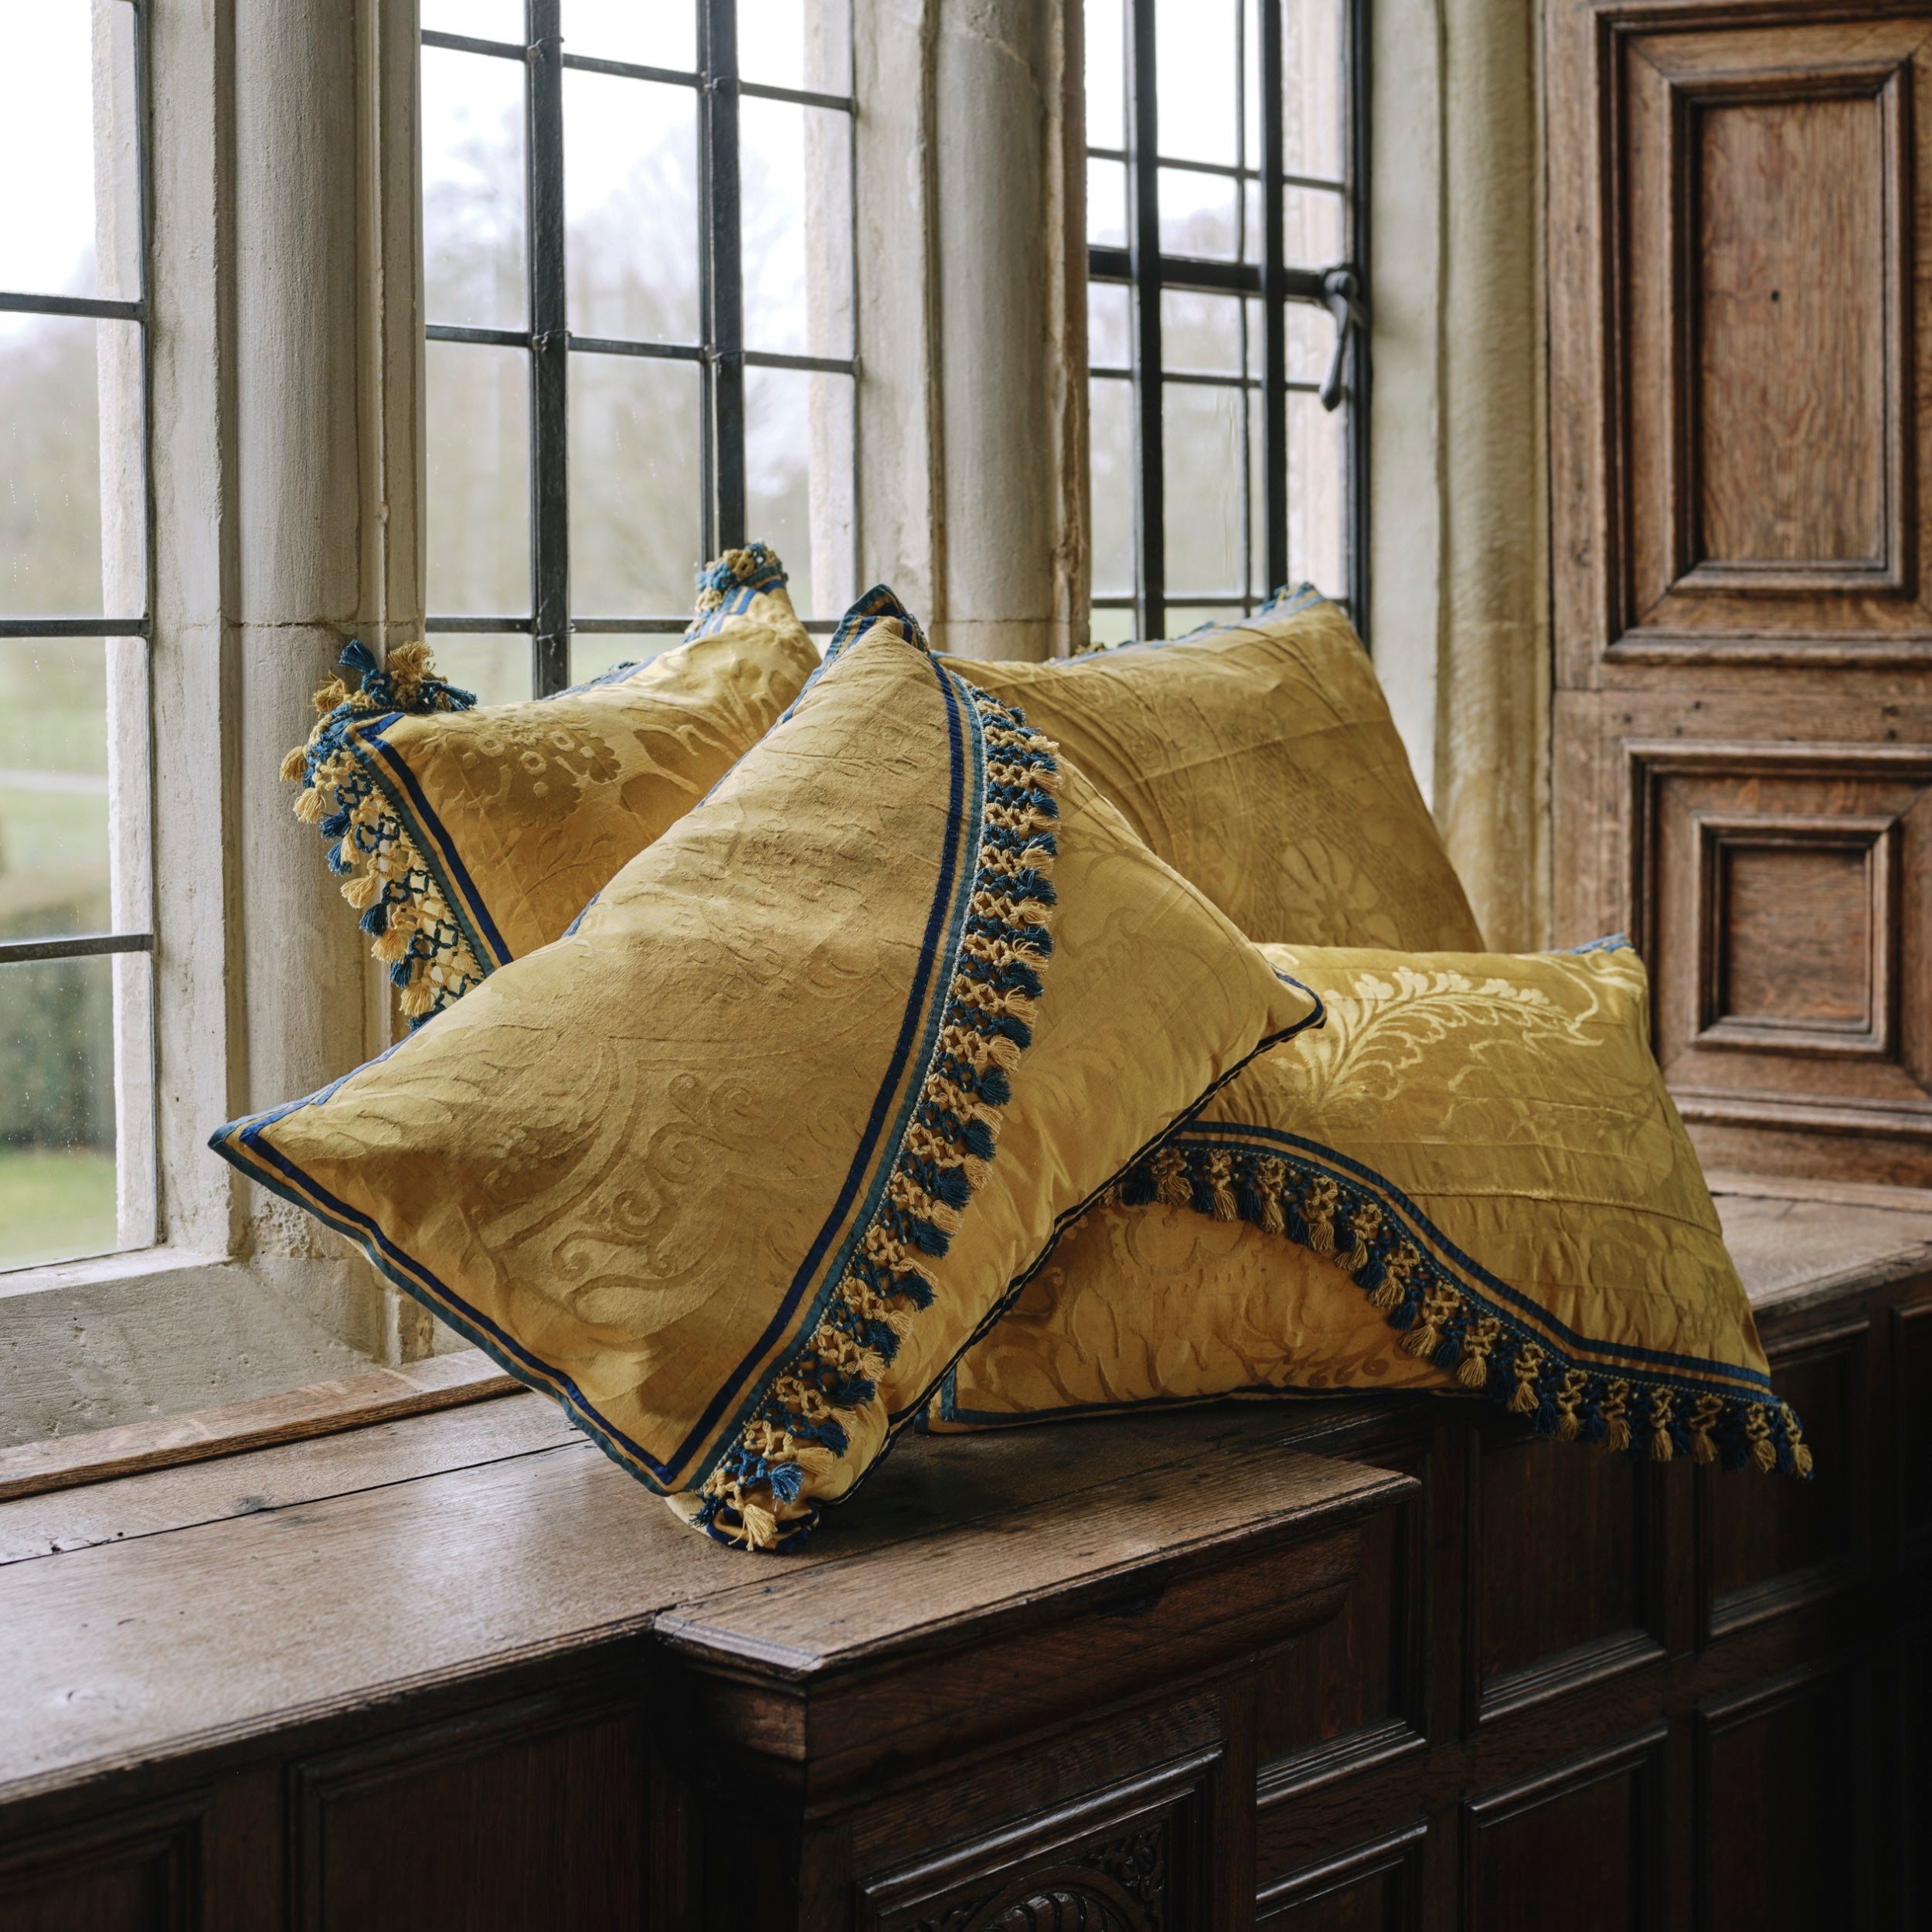 A Pair of Cushions made from Vivid 19th Century Silk Damask with Original Tassel Decoration